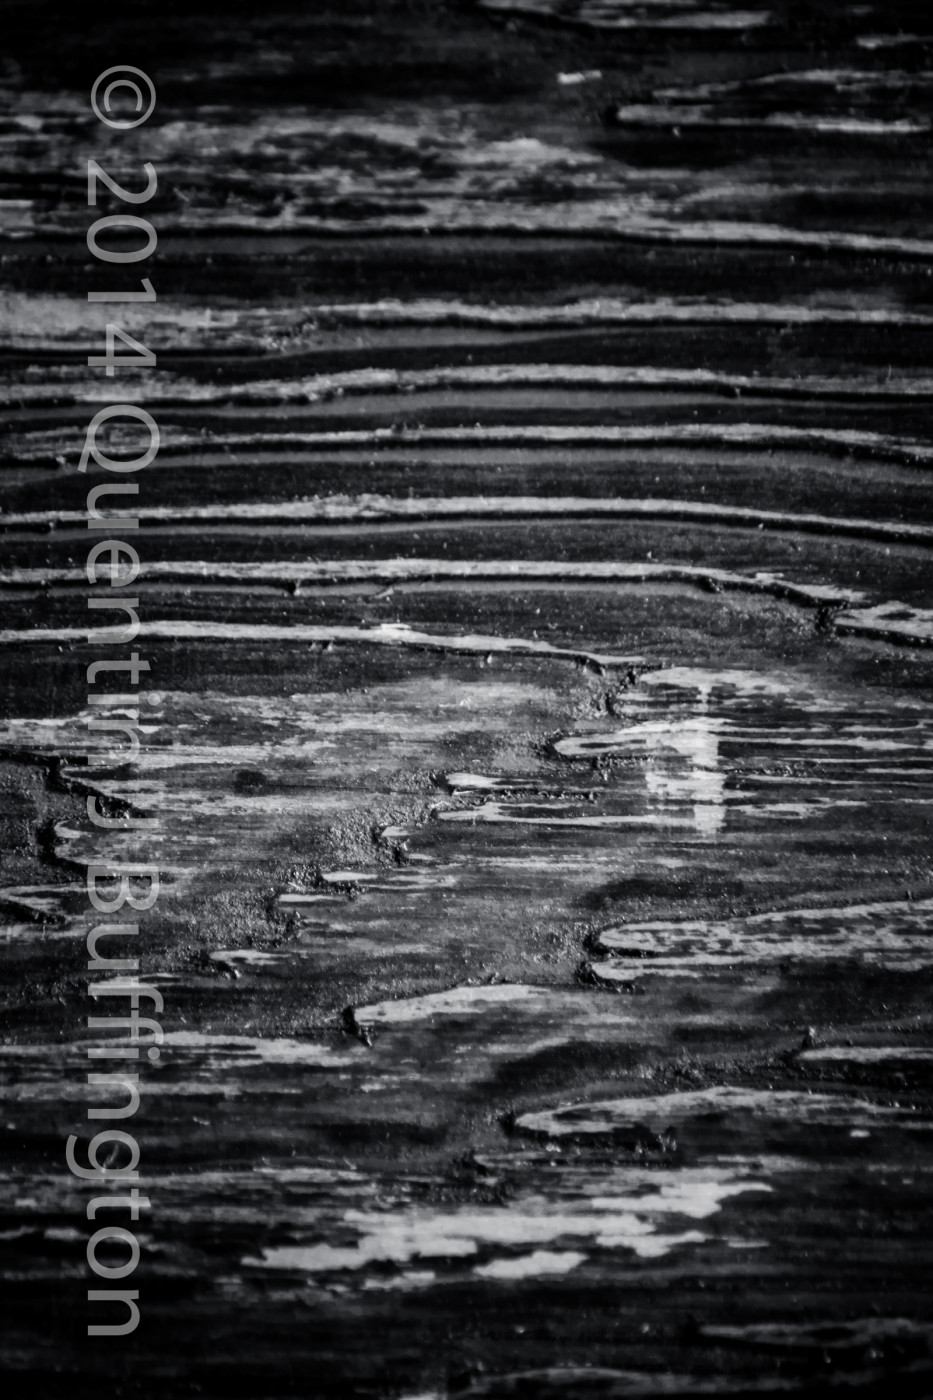 A close up of some wood showing a texture that almost looks like lines on a map.